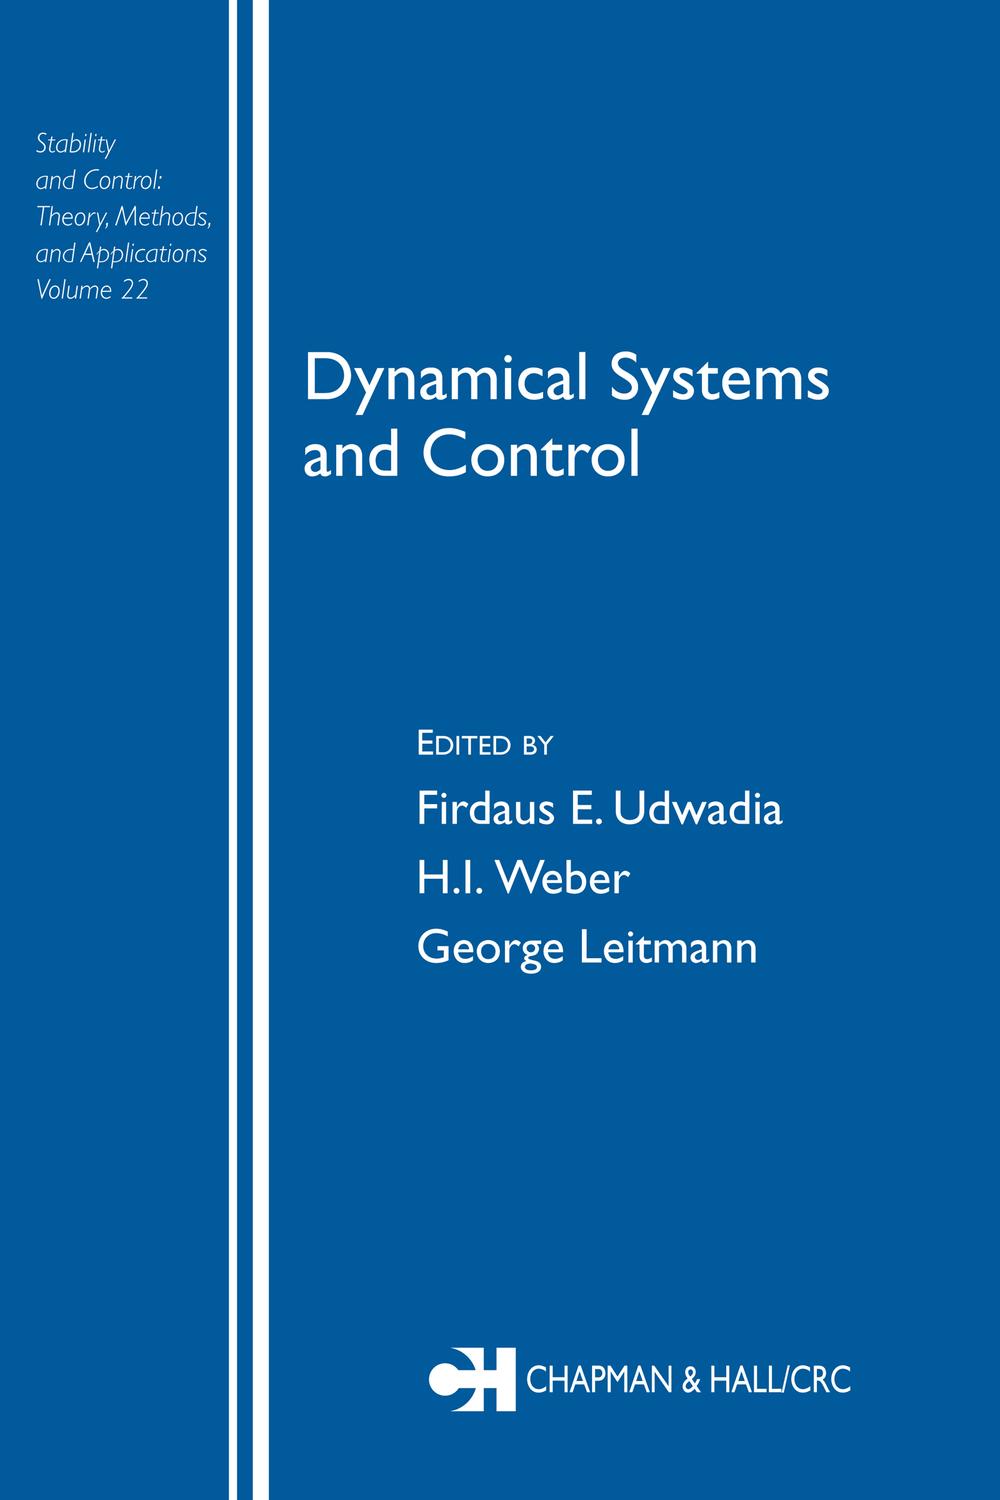 Dynamical Systems and Control - Firdaus E. Udwadia, H.I. Weber, George Leitmann